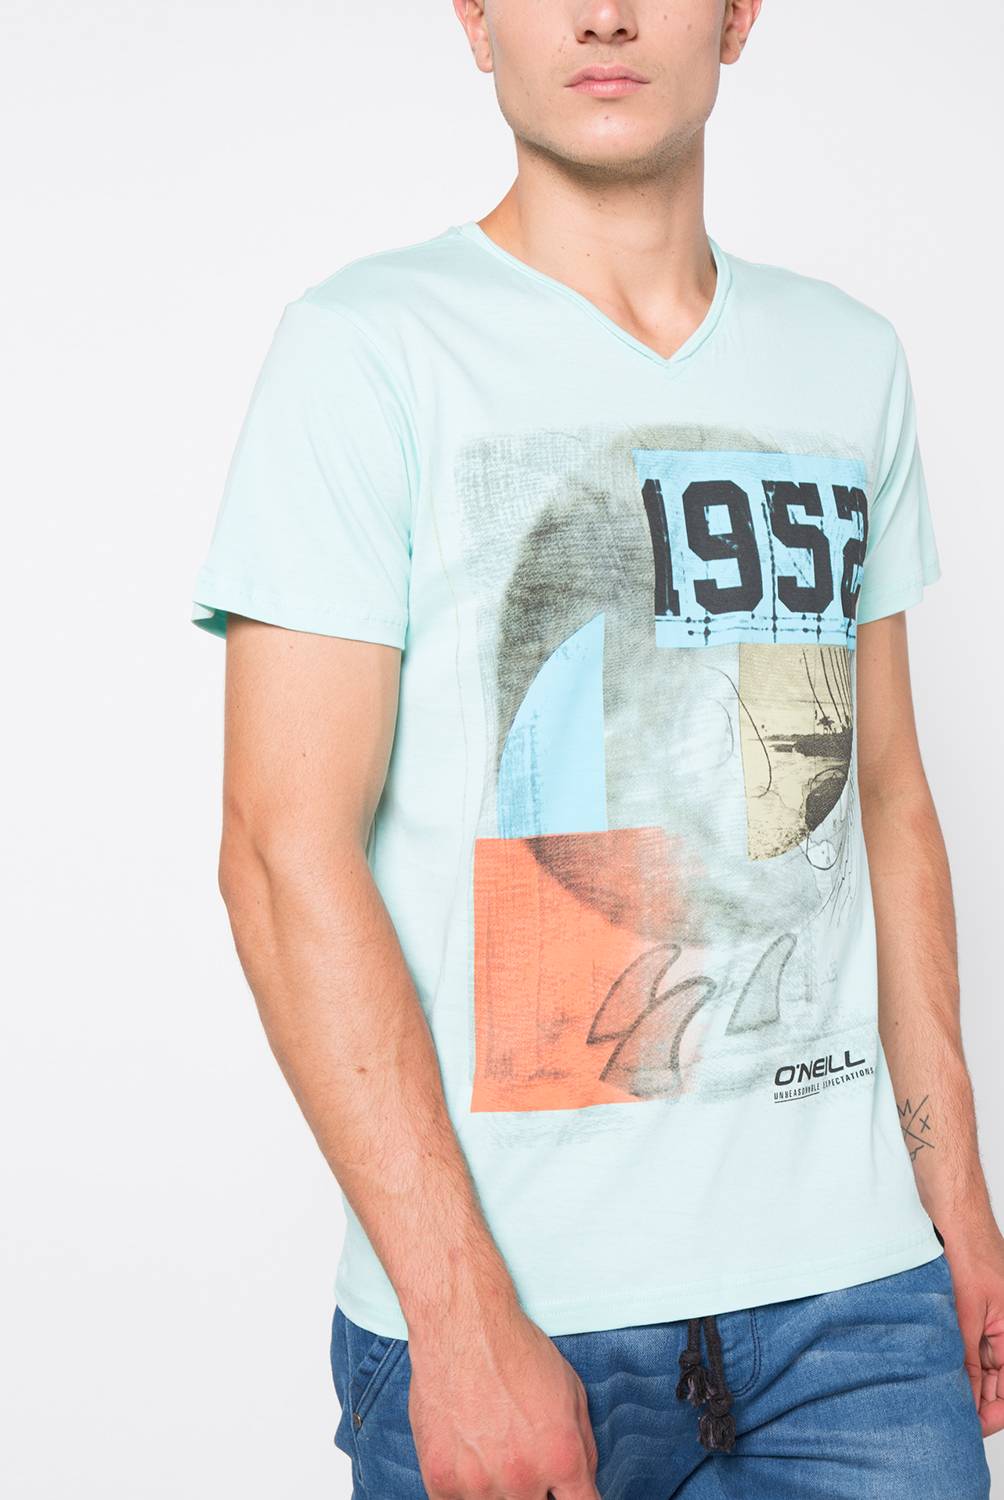 ONEILL - Polera Casual Classic Fit